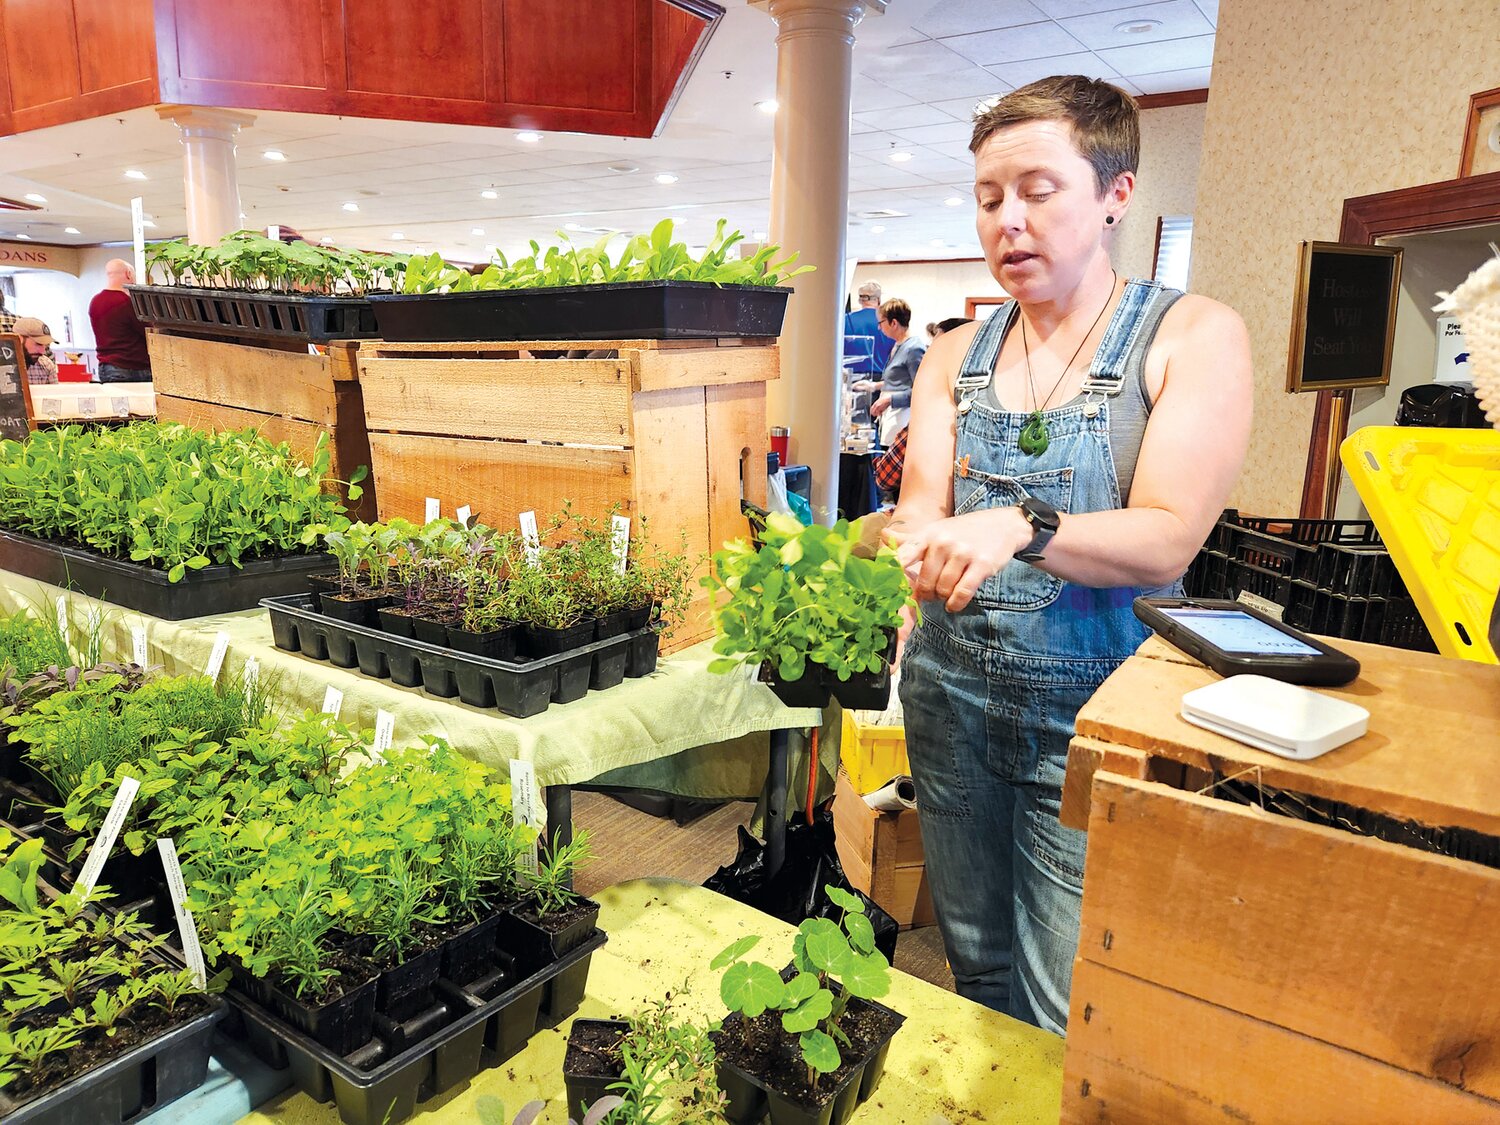 Sam Marlow of Roots to River Farm answers questions on the vegetable and herb plants she was selling at last week’s Wrightstown Farmers Market.